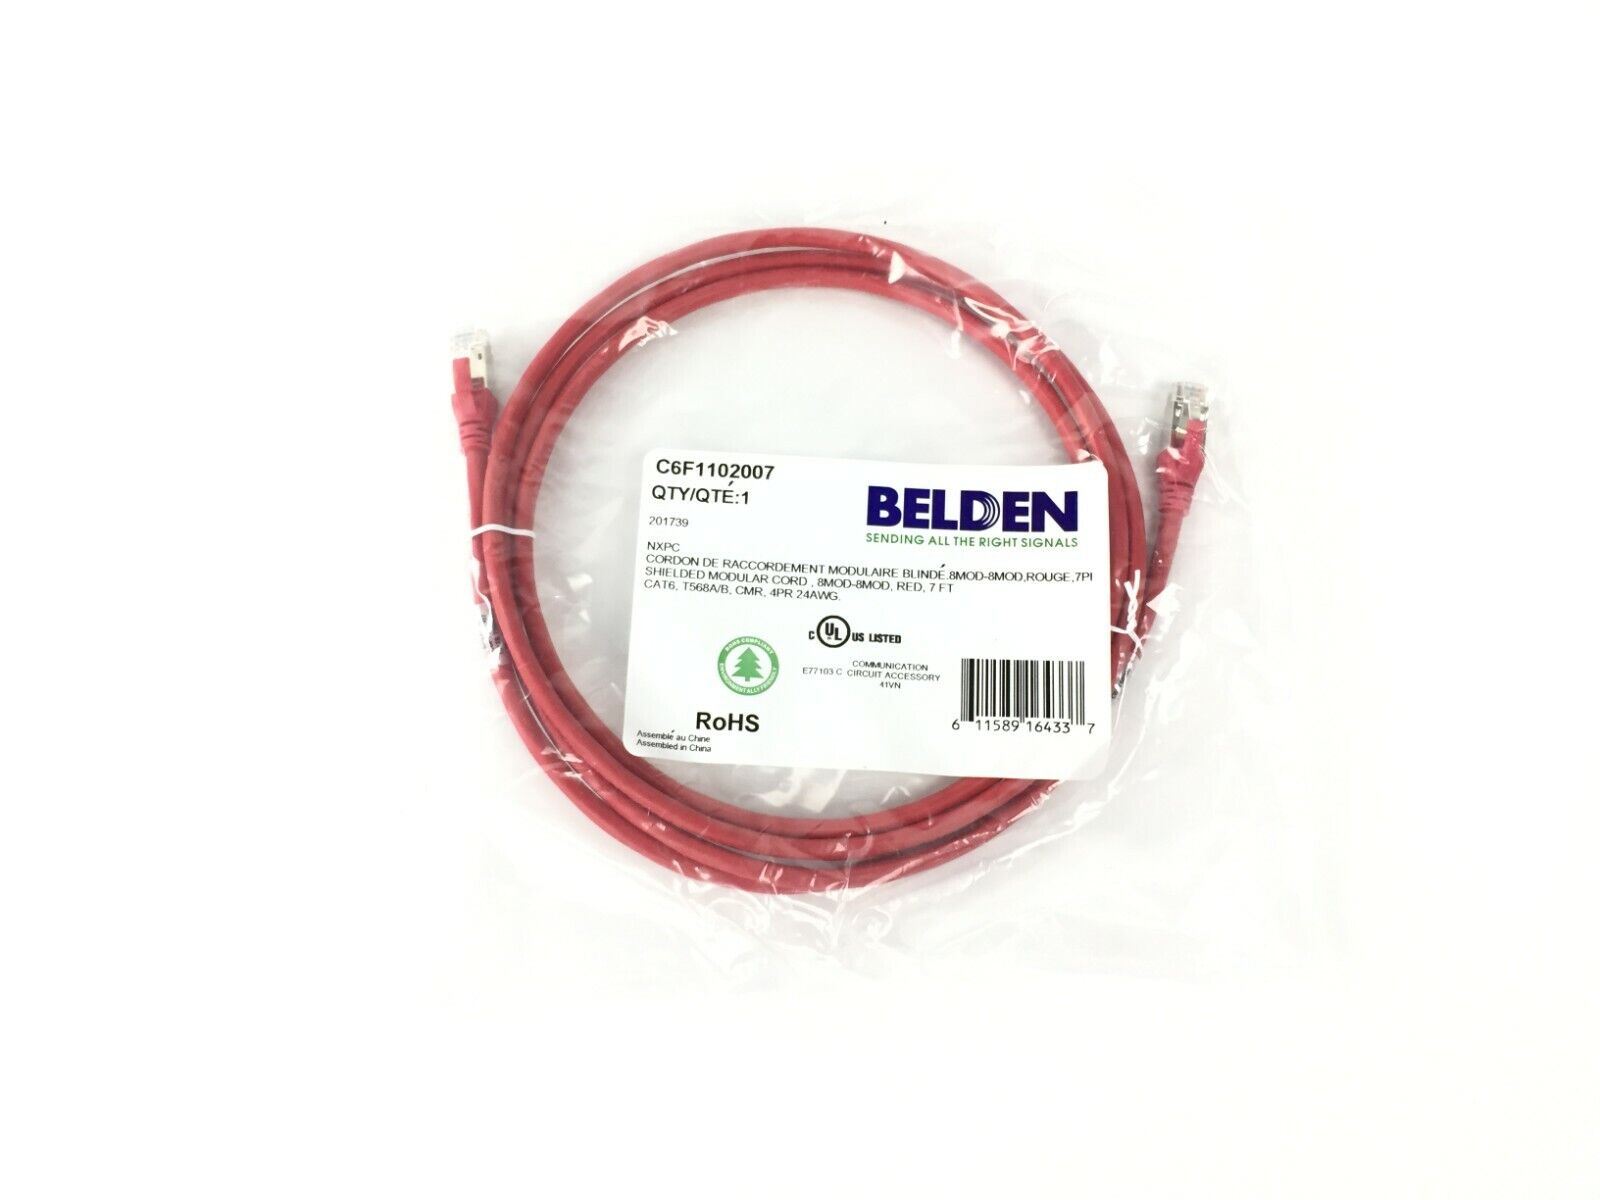 Belden Eithernet CAT6 Patch Cord 7ft (Red) C6F1102007 201739